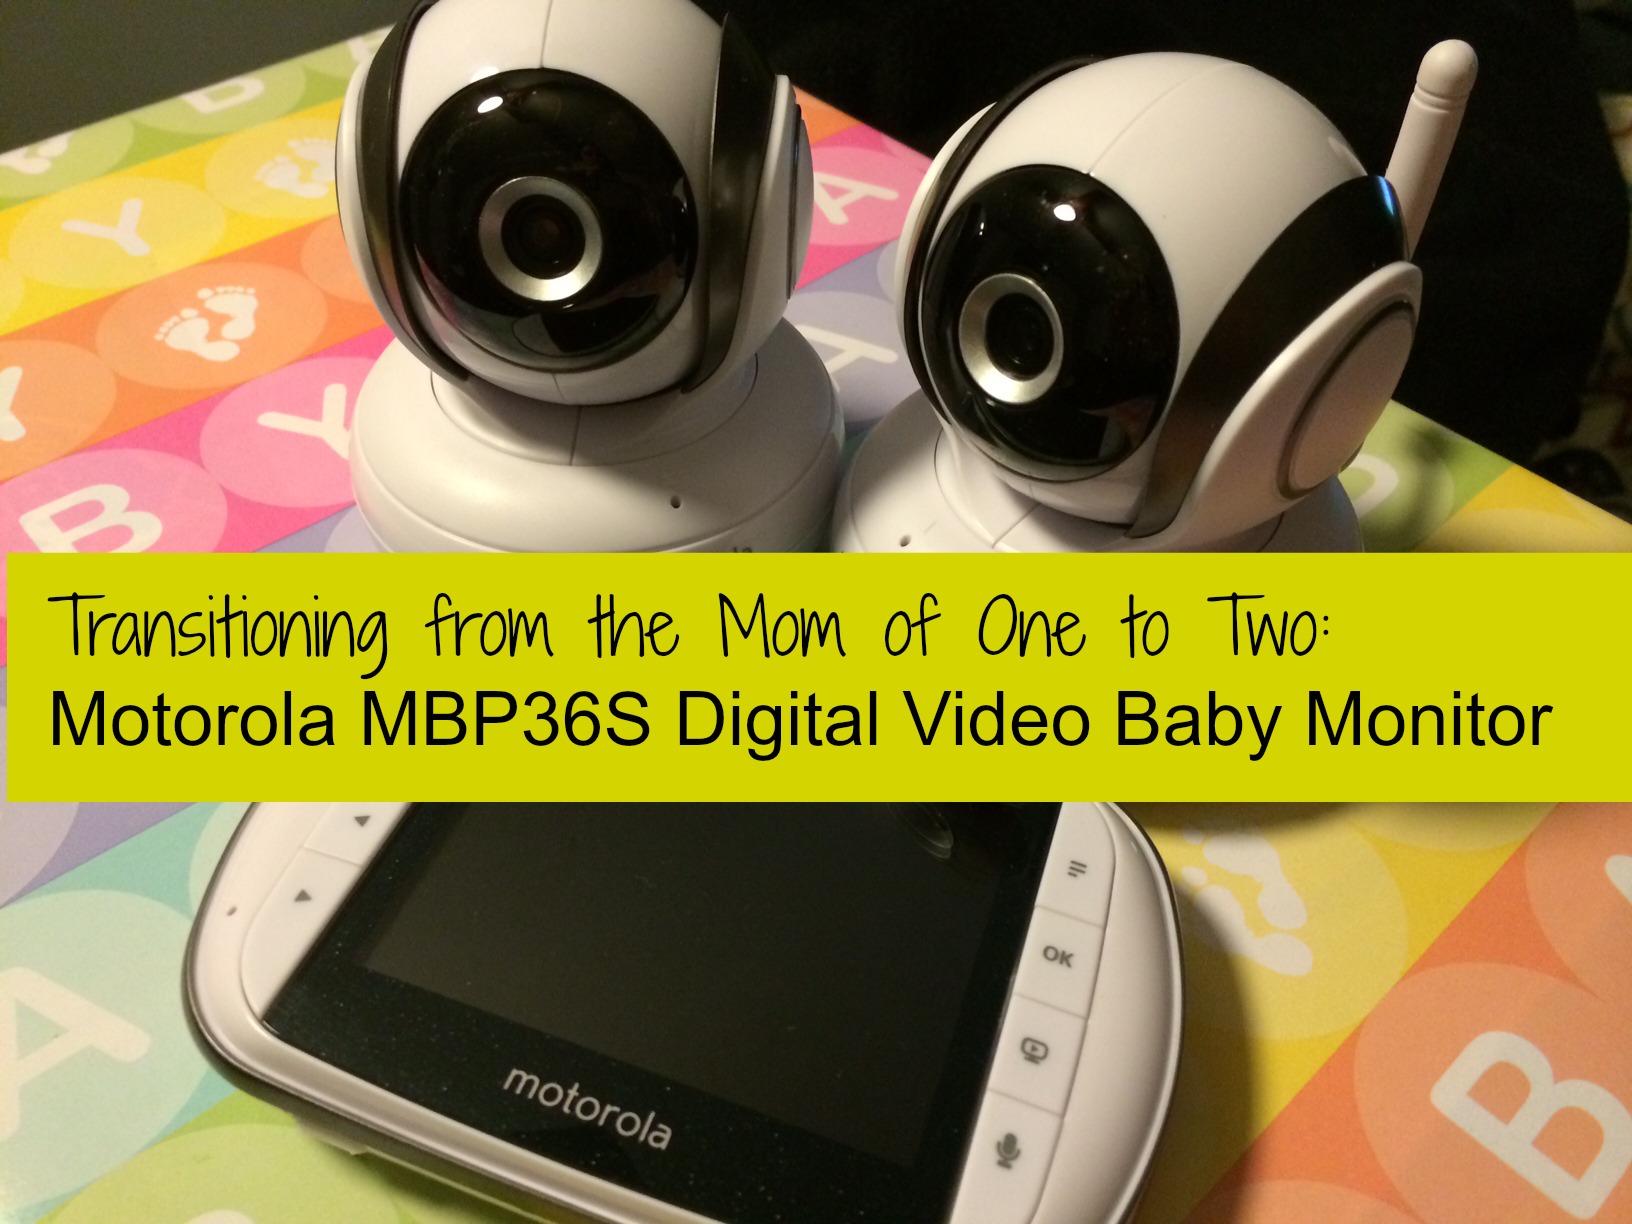 Transitioning from the Mom of One to Two: Motorola MBP36S Digital Video Baby Monitor